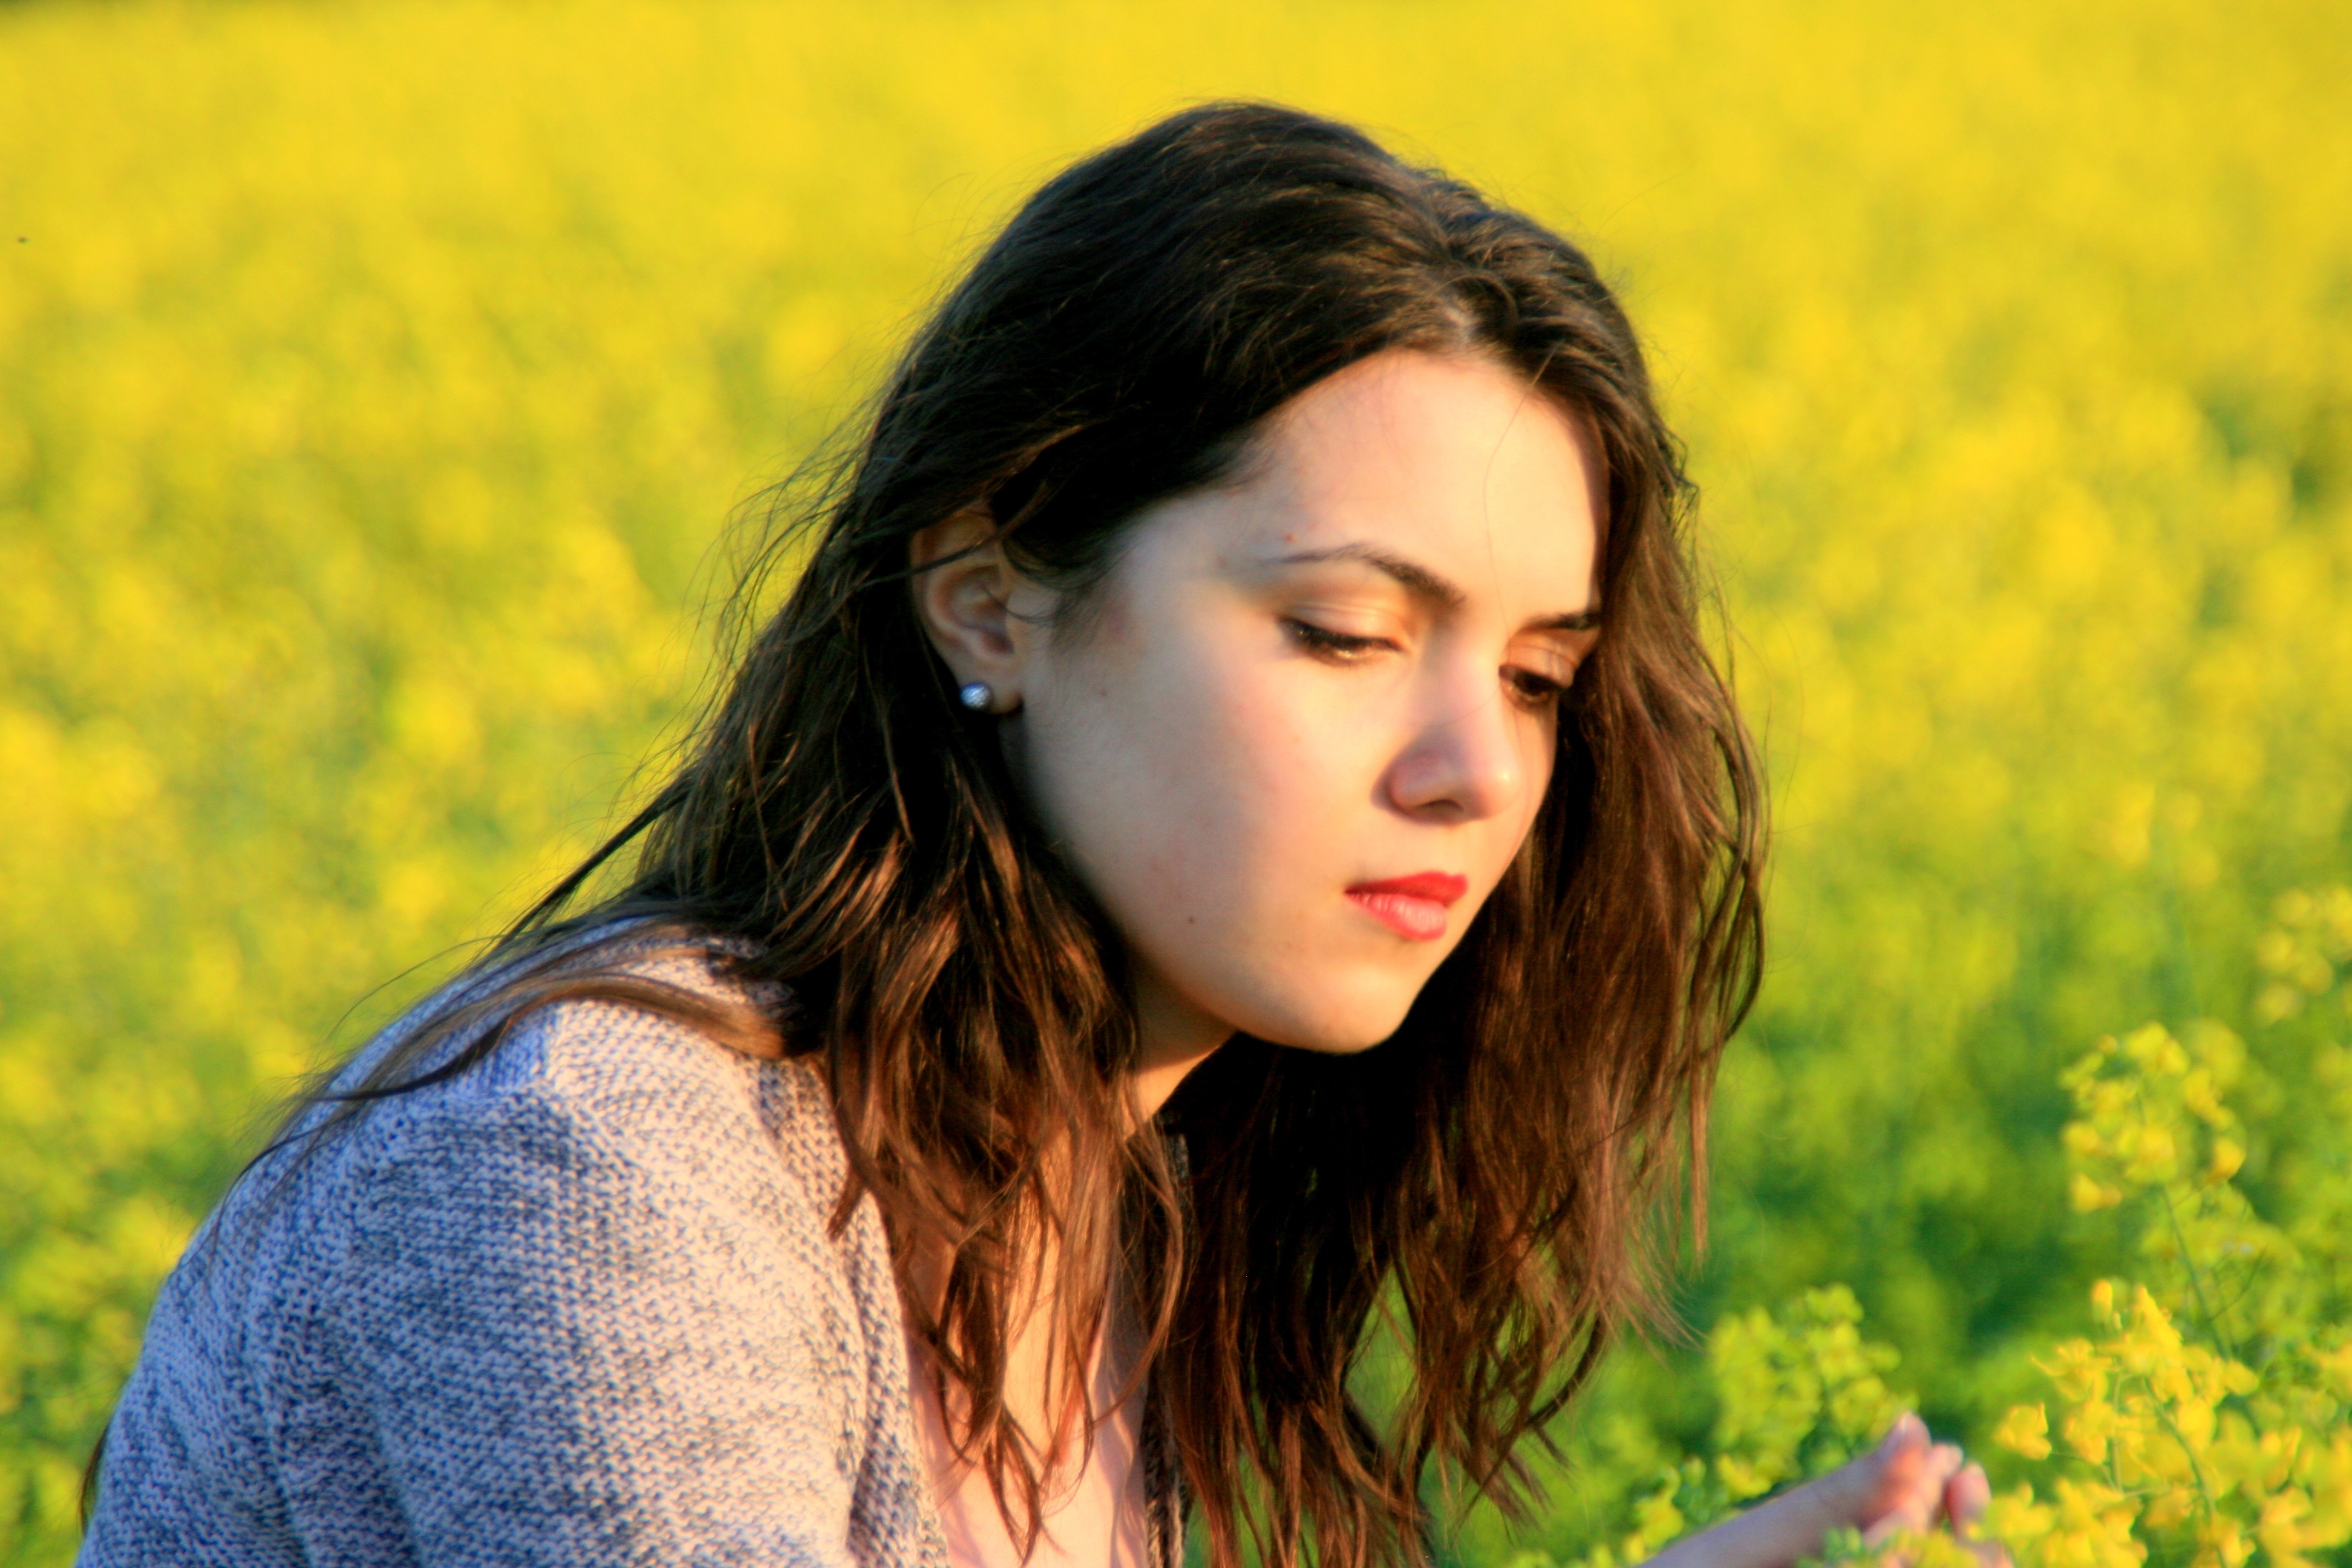 woman in gray shirt sitting on yellow flower fields at daytime